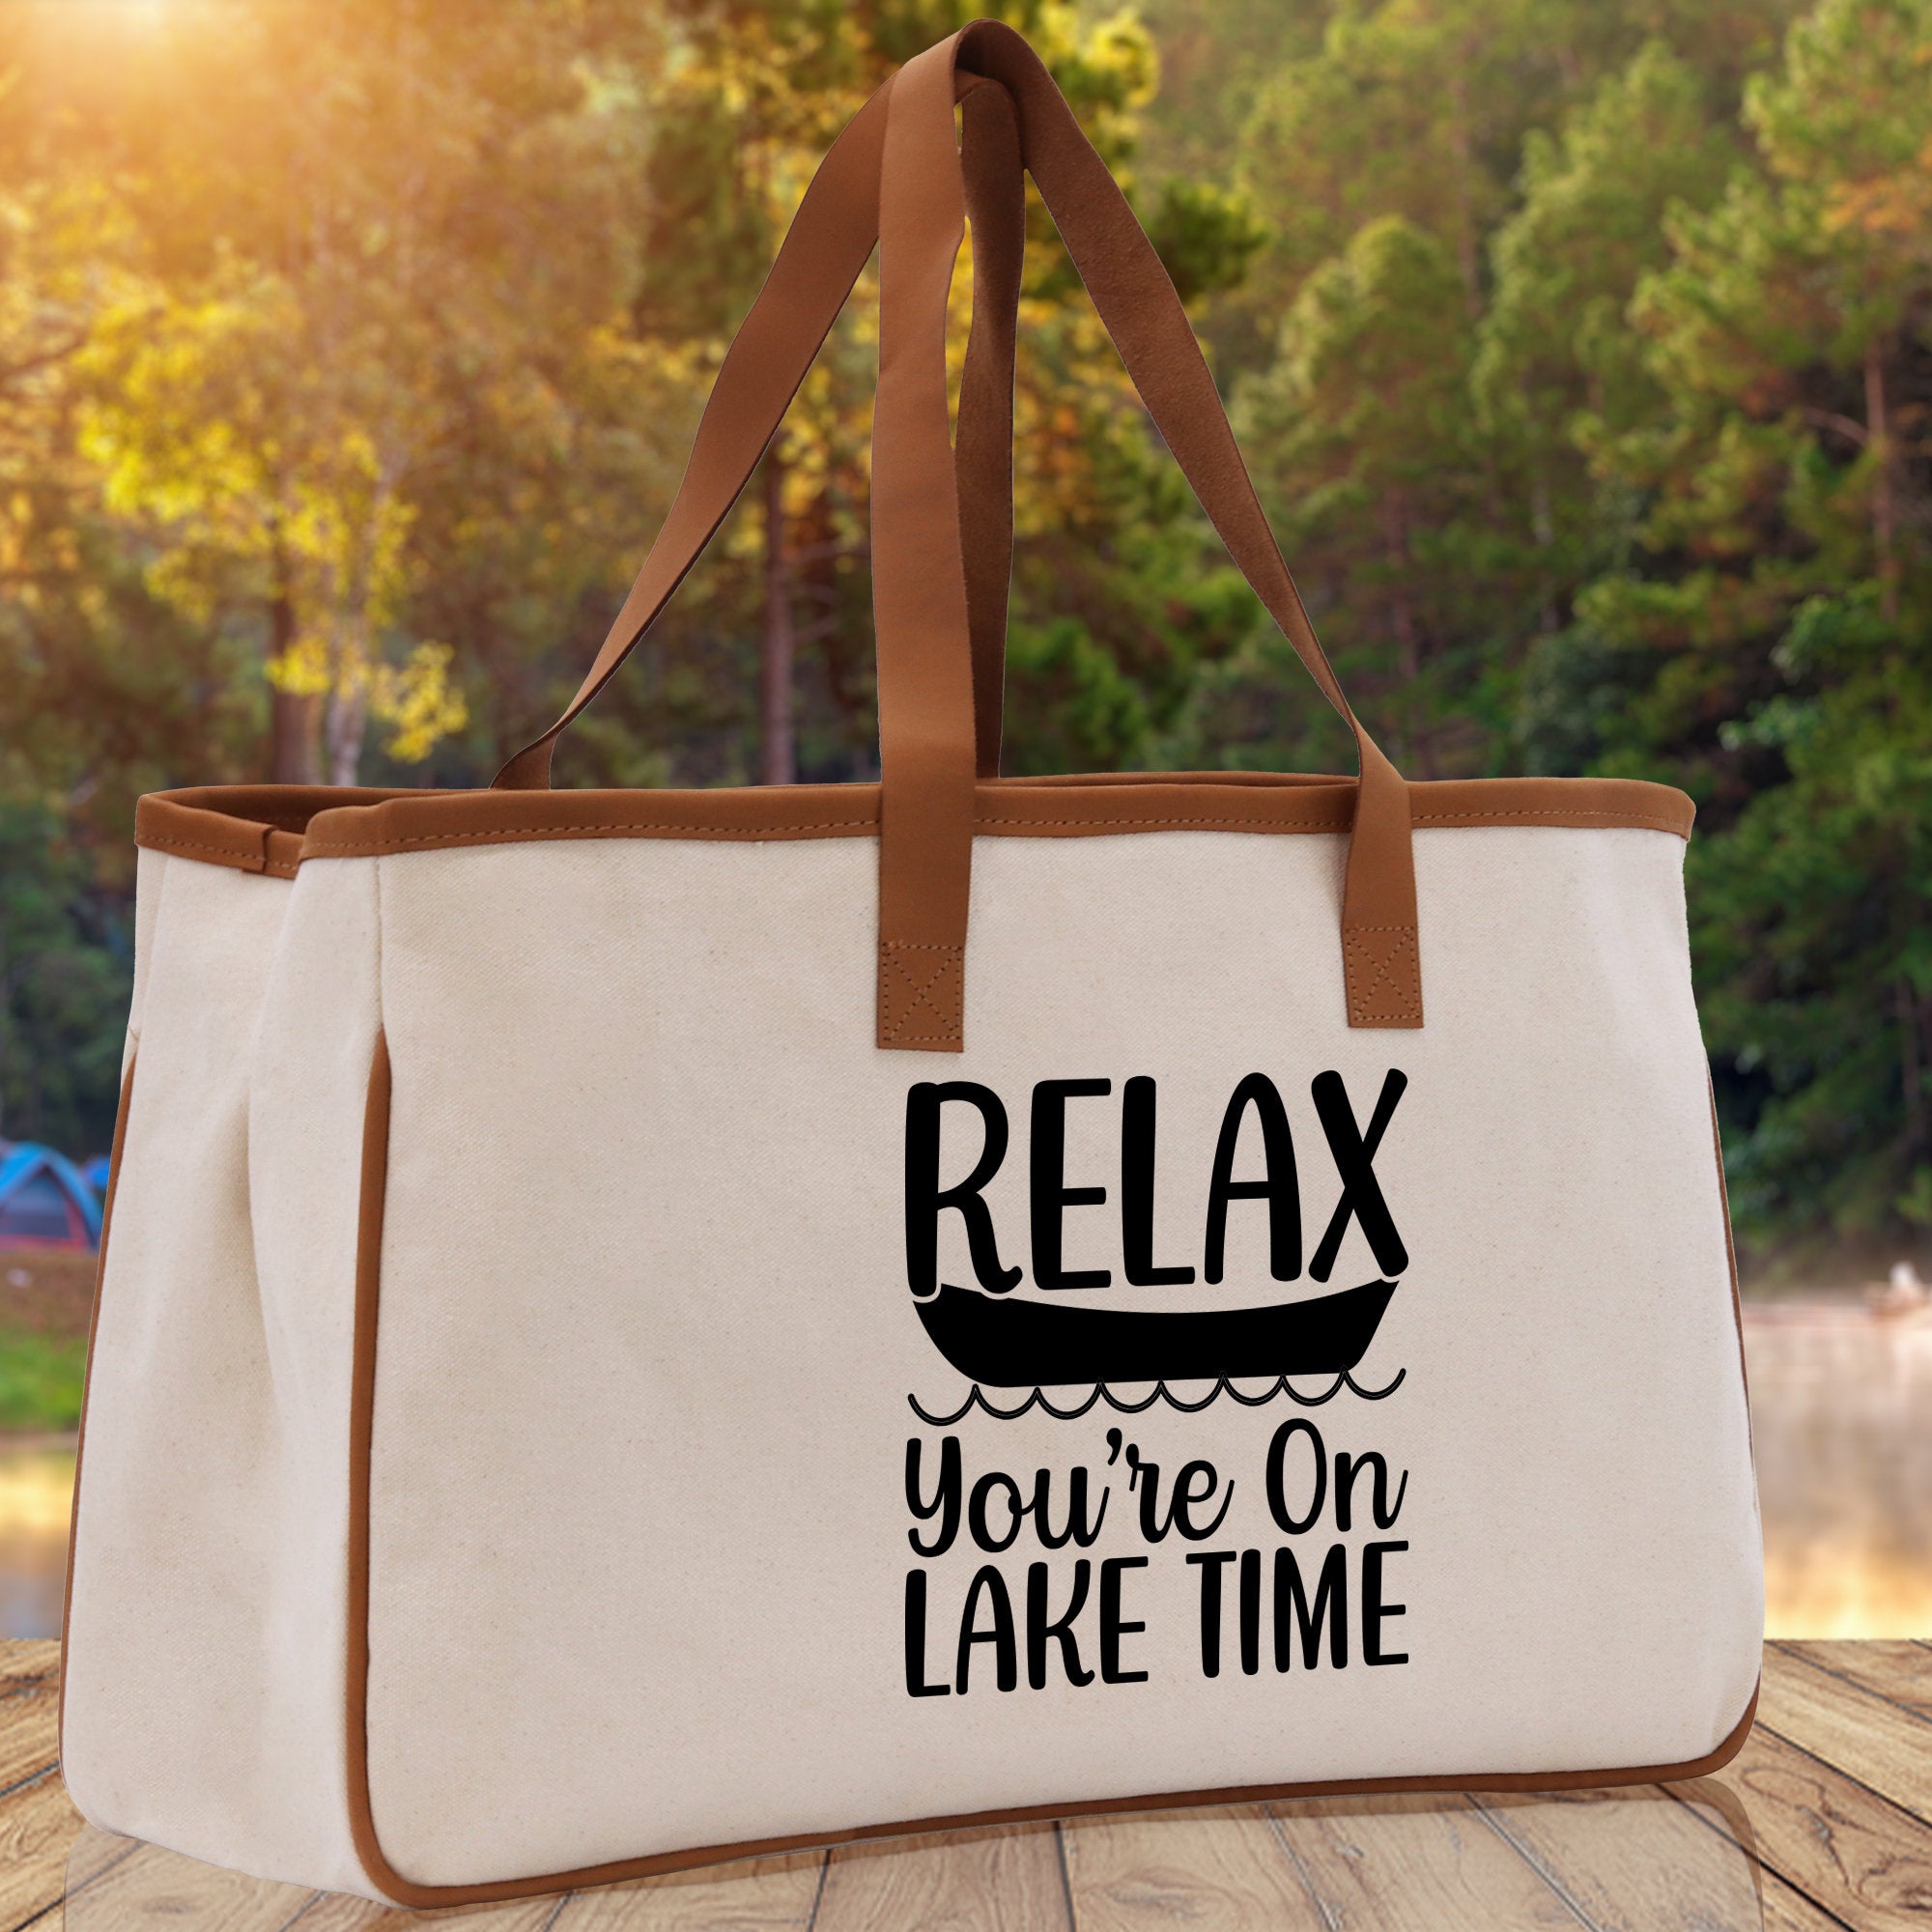 Relax You're On Lake Time Cotton Canvas Chic Tote Bag Camping Tote Lake Lover Gift Tote Bag Outdoor Tote Weekender Tote Laker Tote